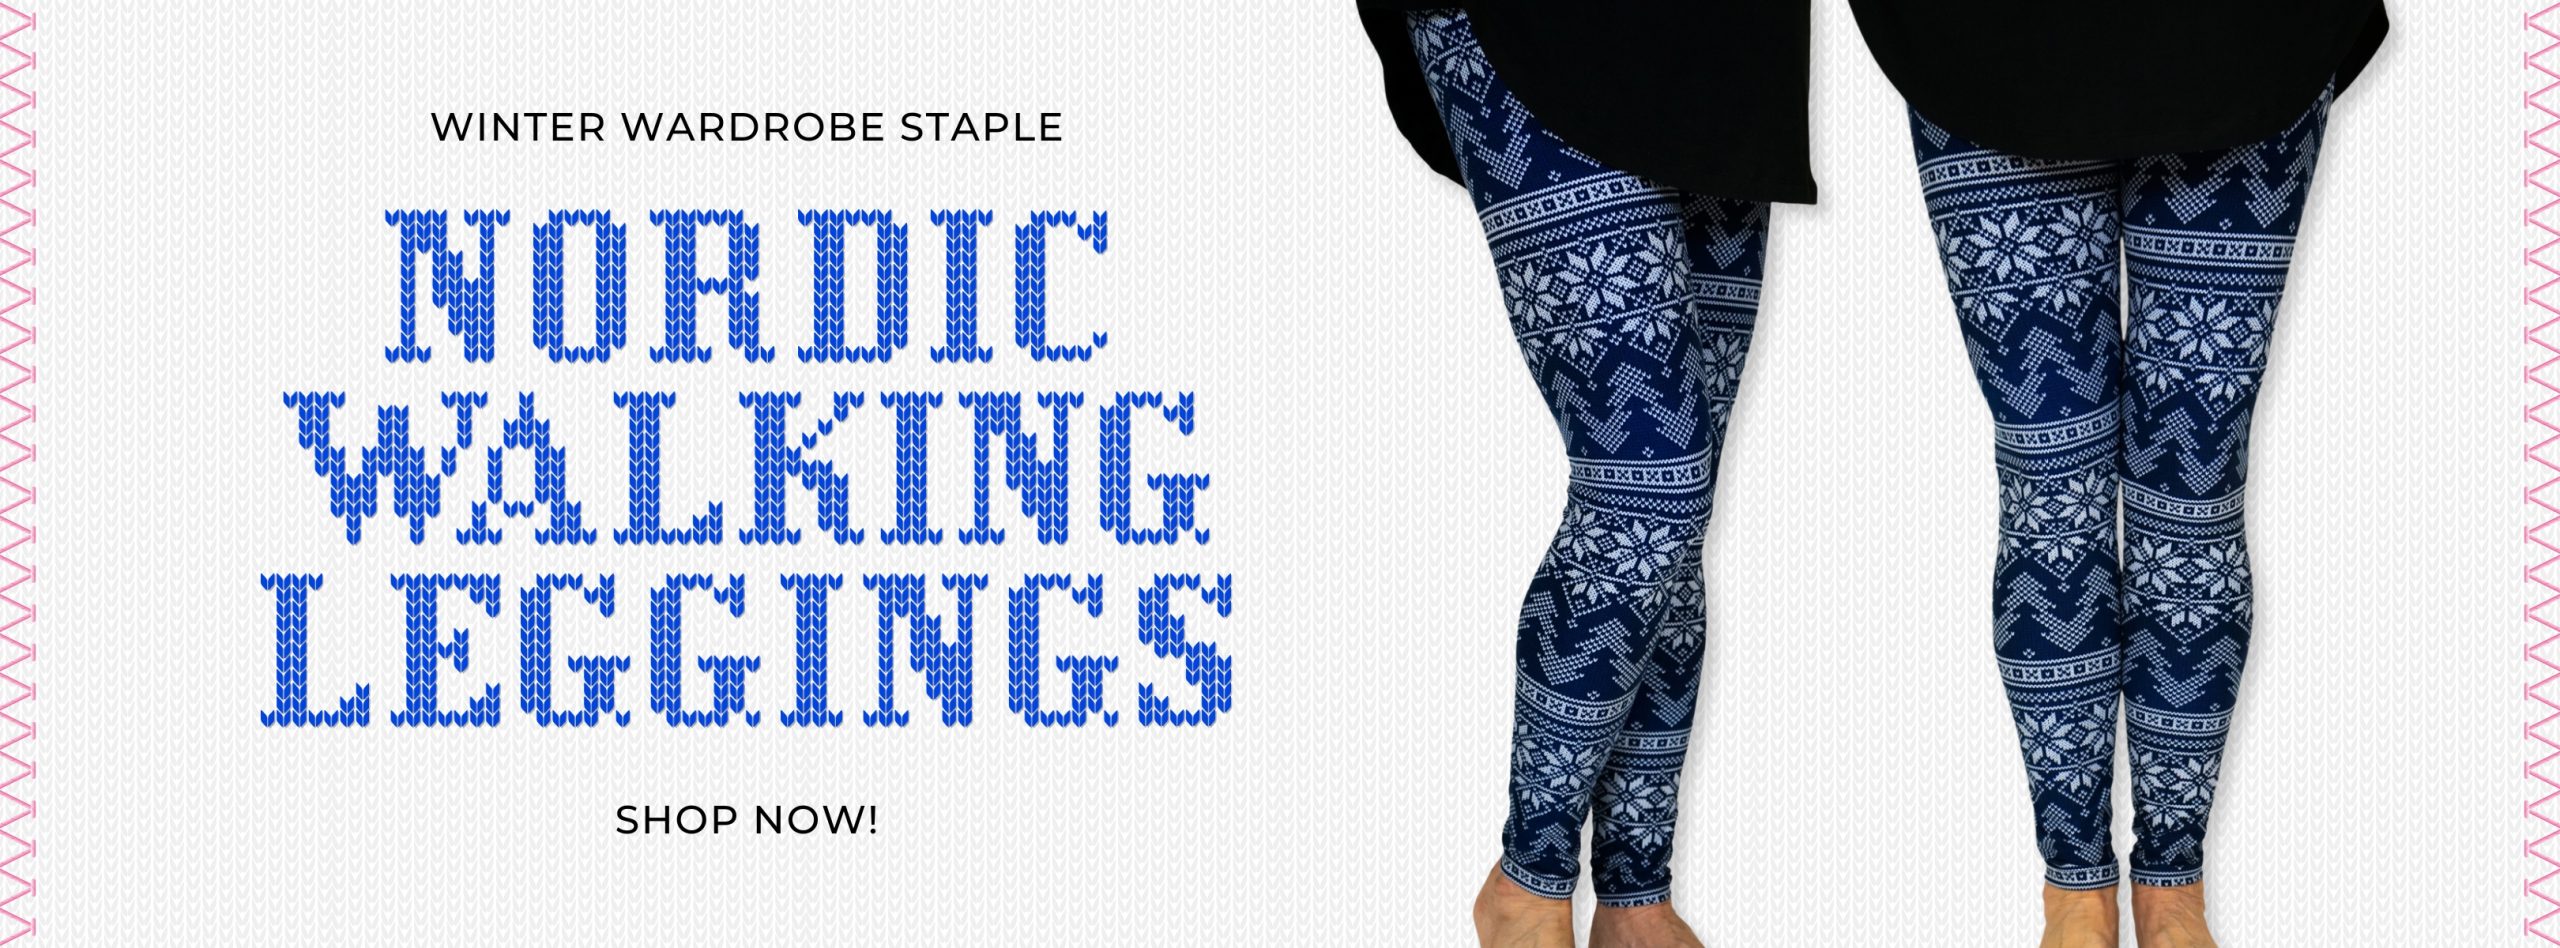 Banner showing our newest leggings: Nordic Walking Leggings. The text on the image says "Winter Wardrobe Staple" and "Nordic Walking Leggings" and "Shop Now!"